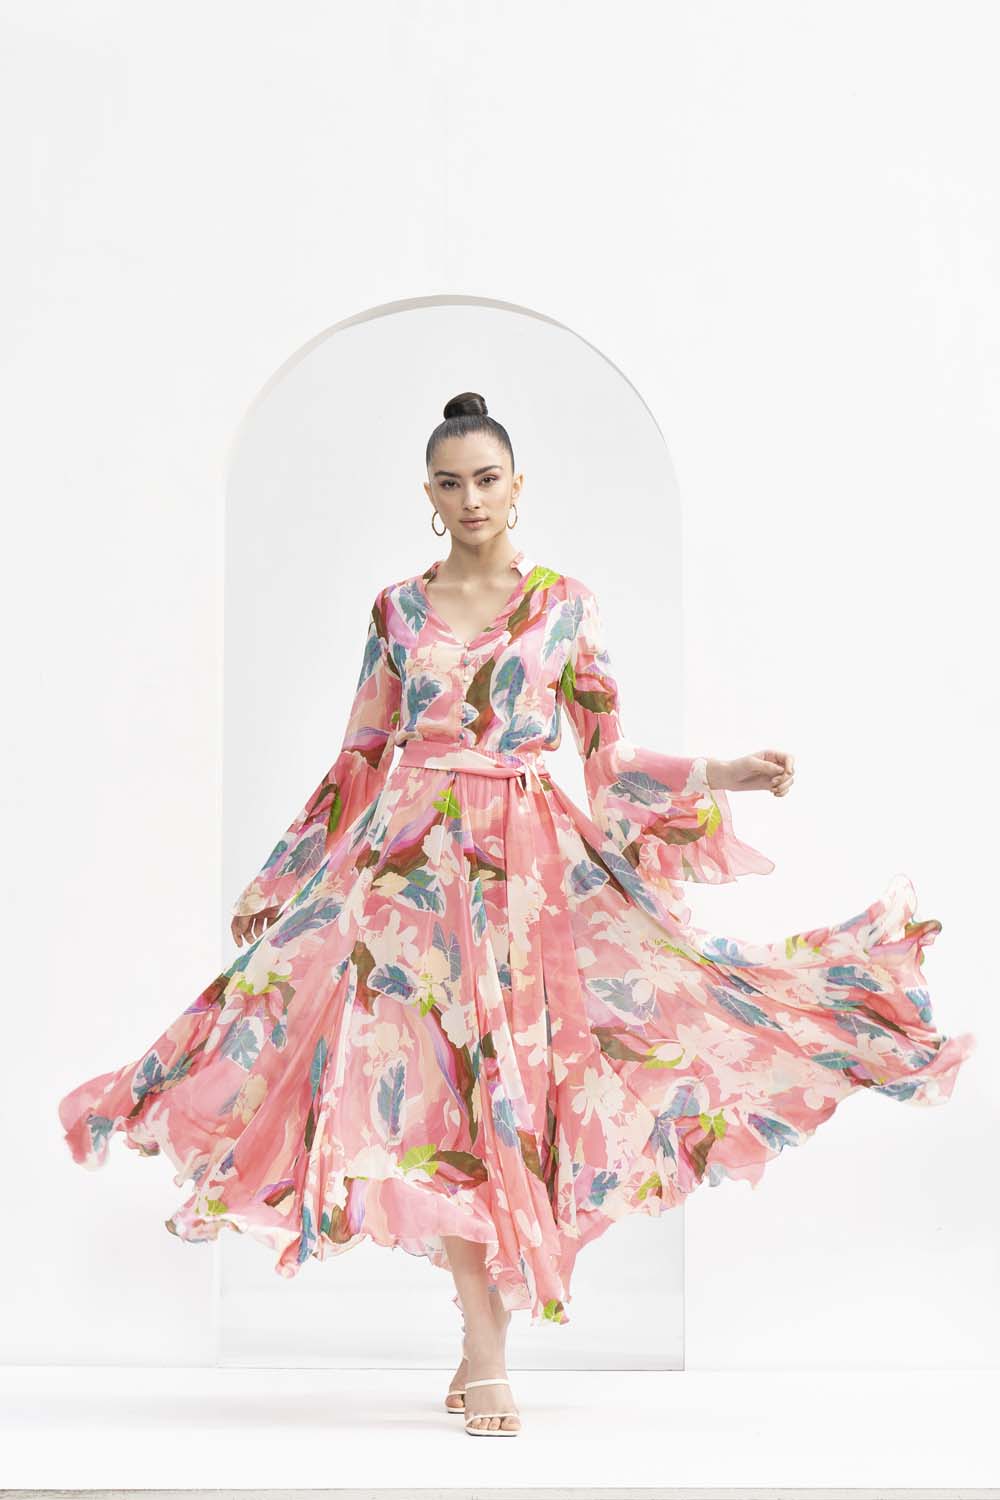 Peach tropical printed chiffon dress with godets and ruffled details on the neckline.